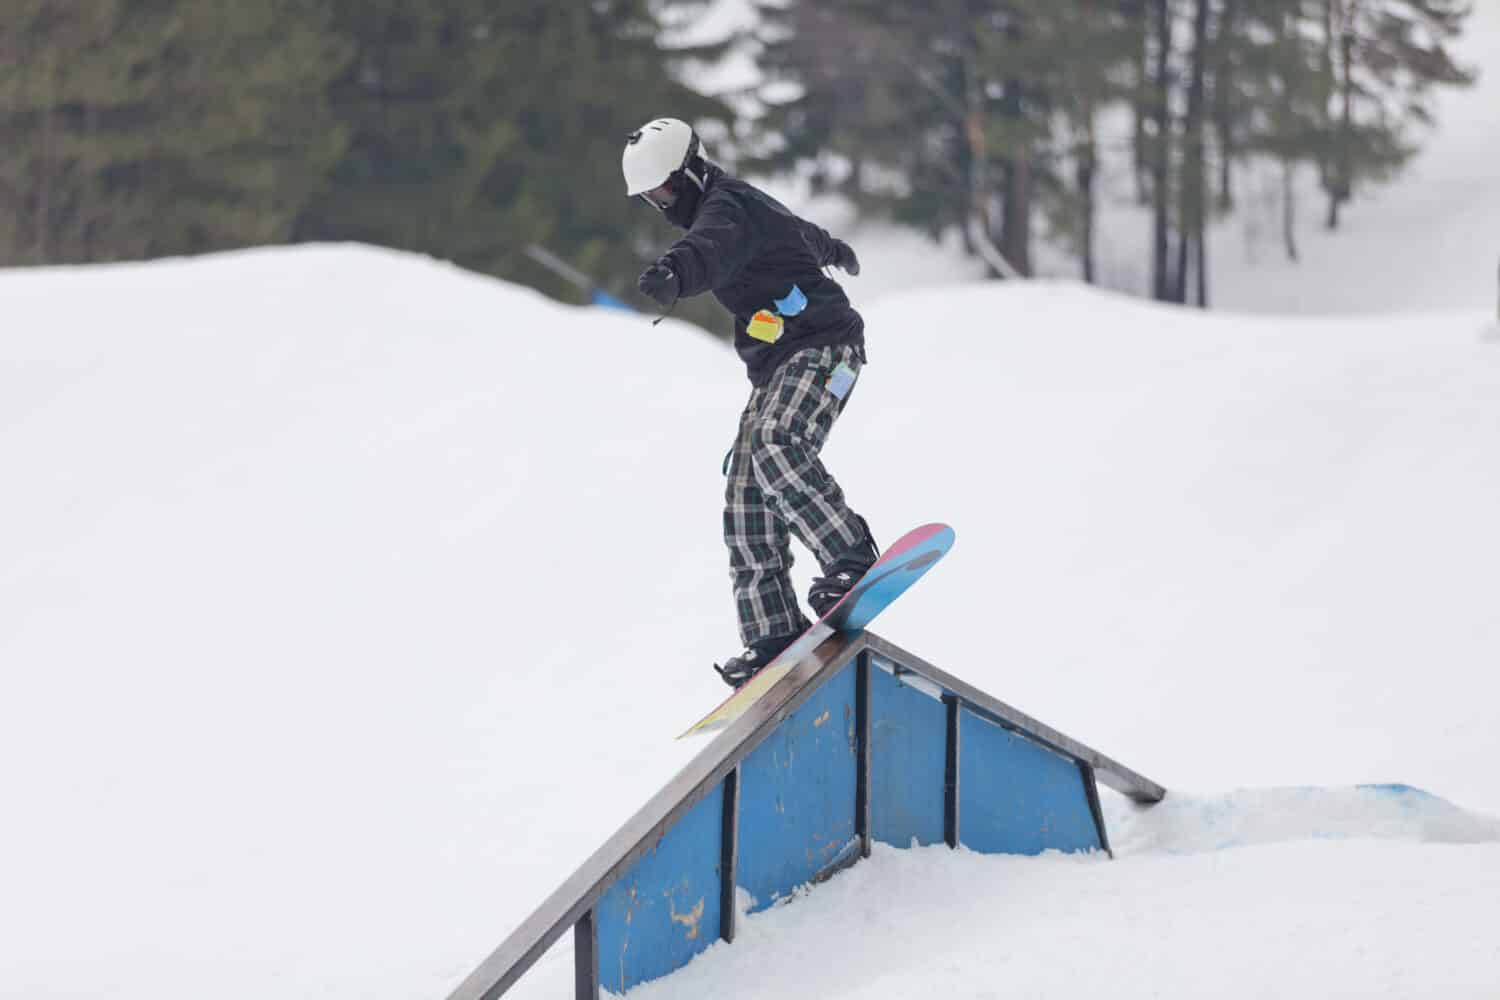 A snowboarder on a ramp at the Wisp Ski Resort in Deep Creek Lake Maryland